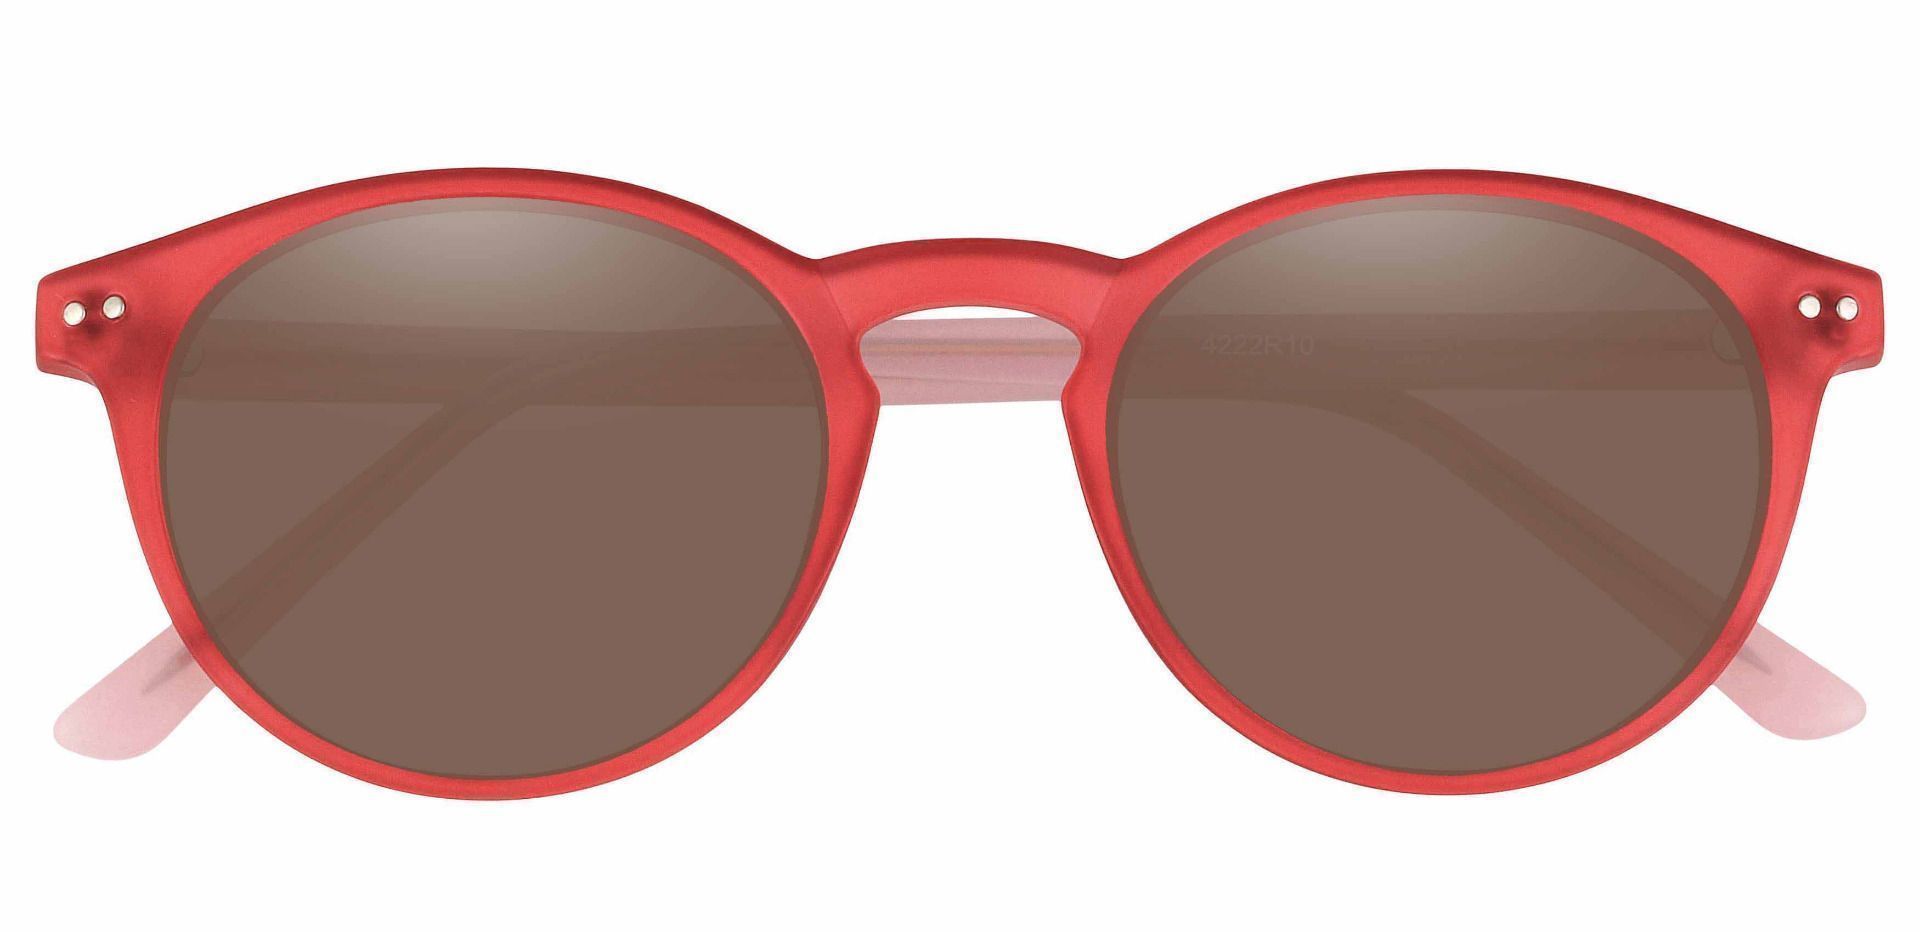 Harmony Oval Prescription Sunglasses - Red Frame With Brown Lenses